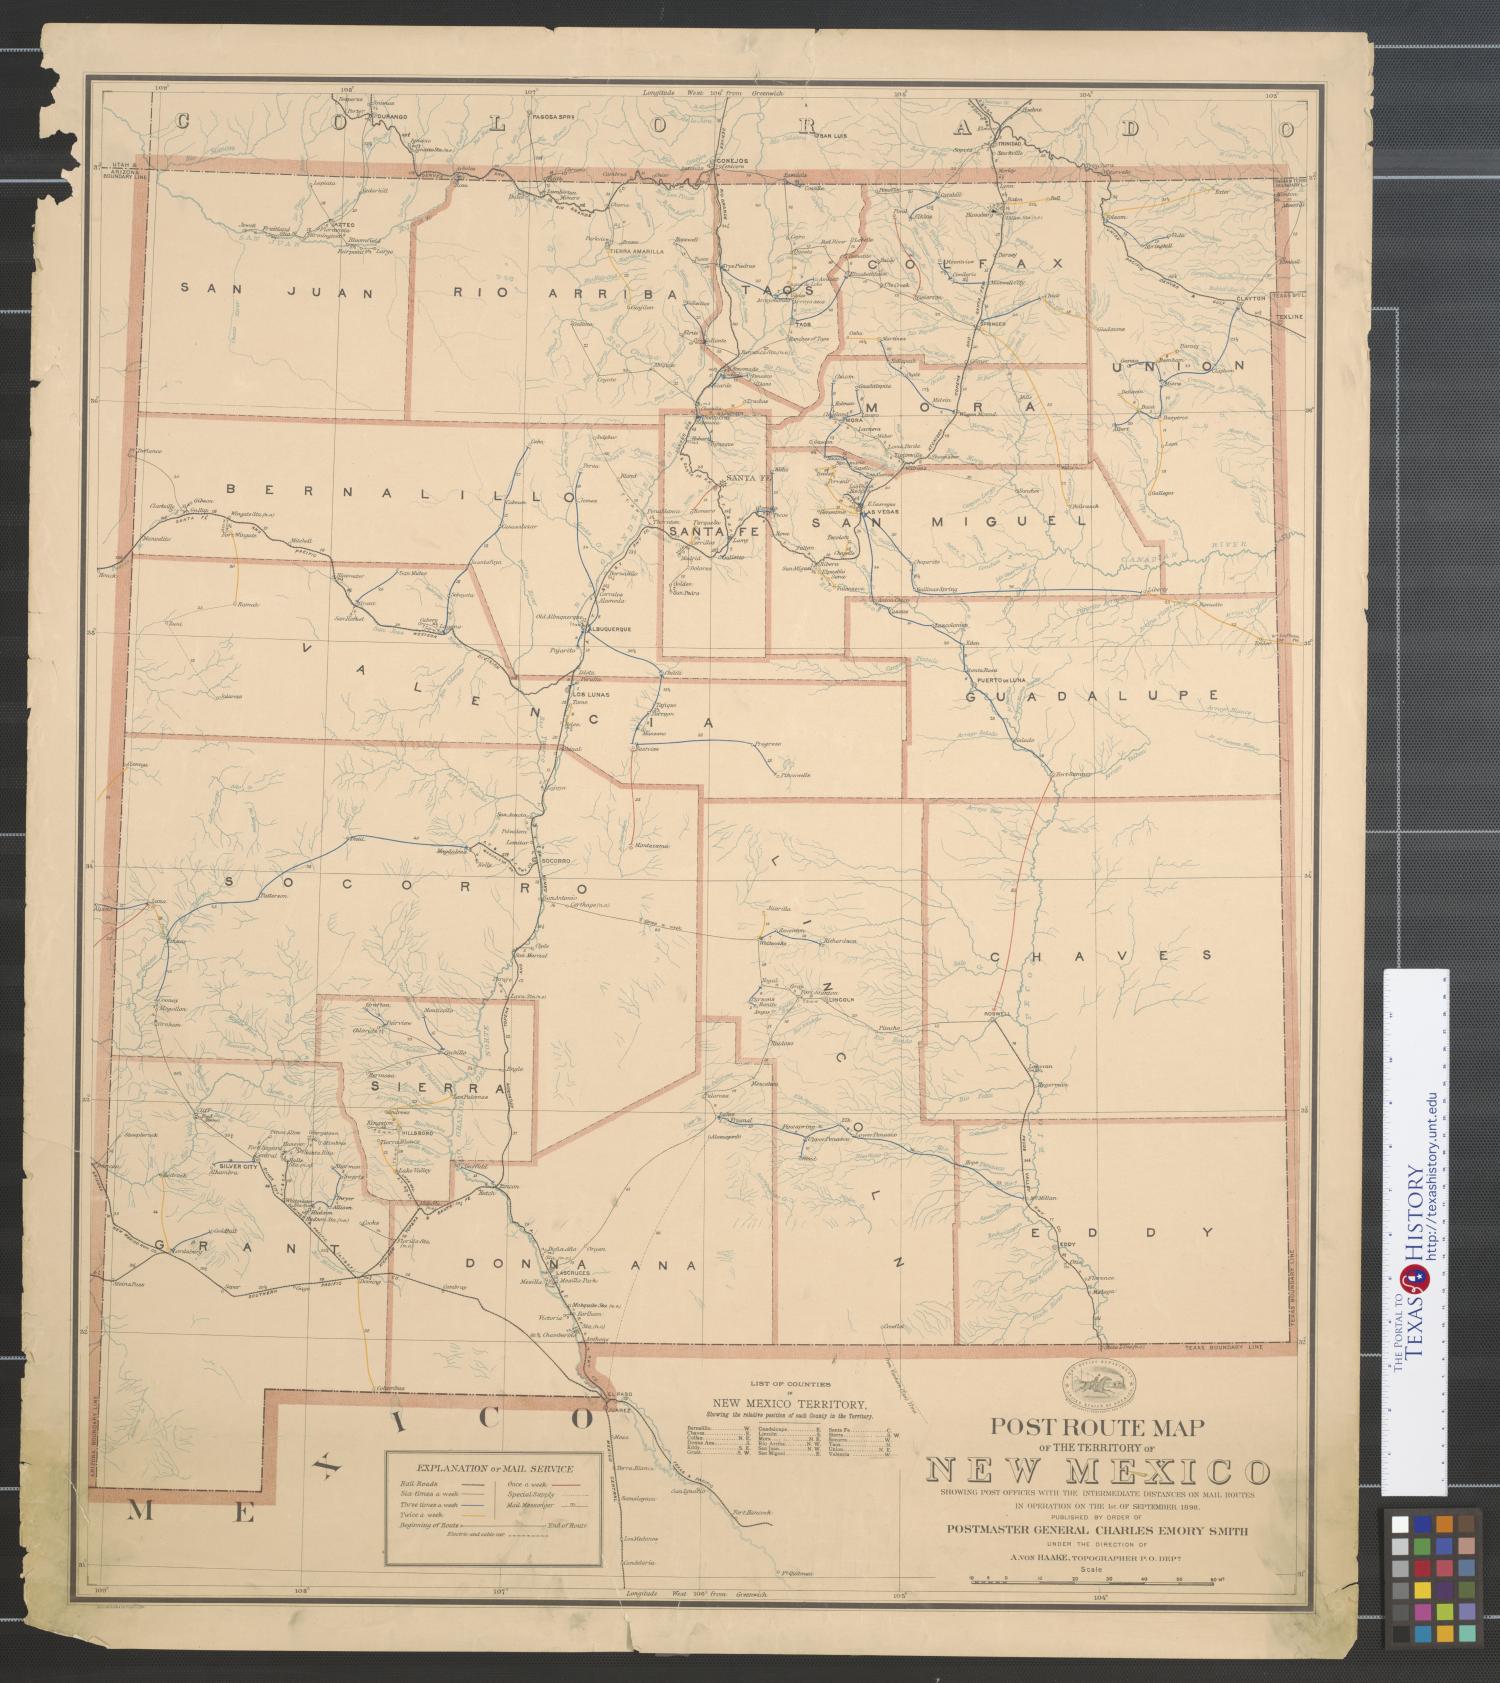 Post route map of the territory of New Mexico : Showing post offices with the intermediate distances on mail routes in operation on the 1st of September 1898.
                                                
                                                    [Sequence #]: 1 of 2
                                                